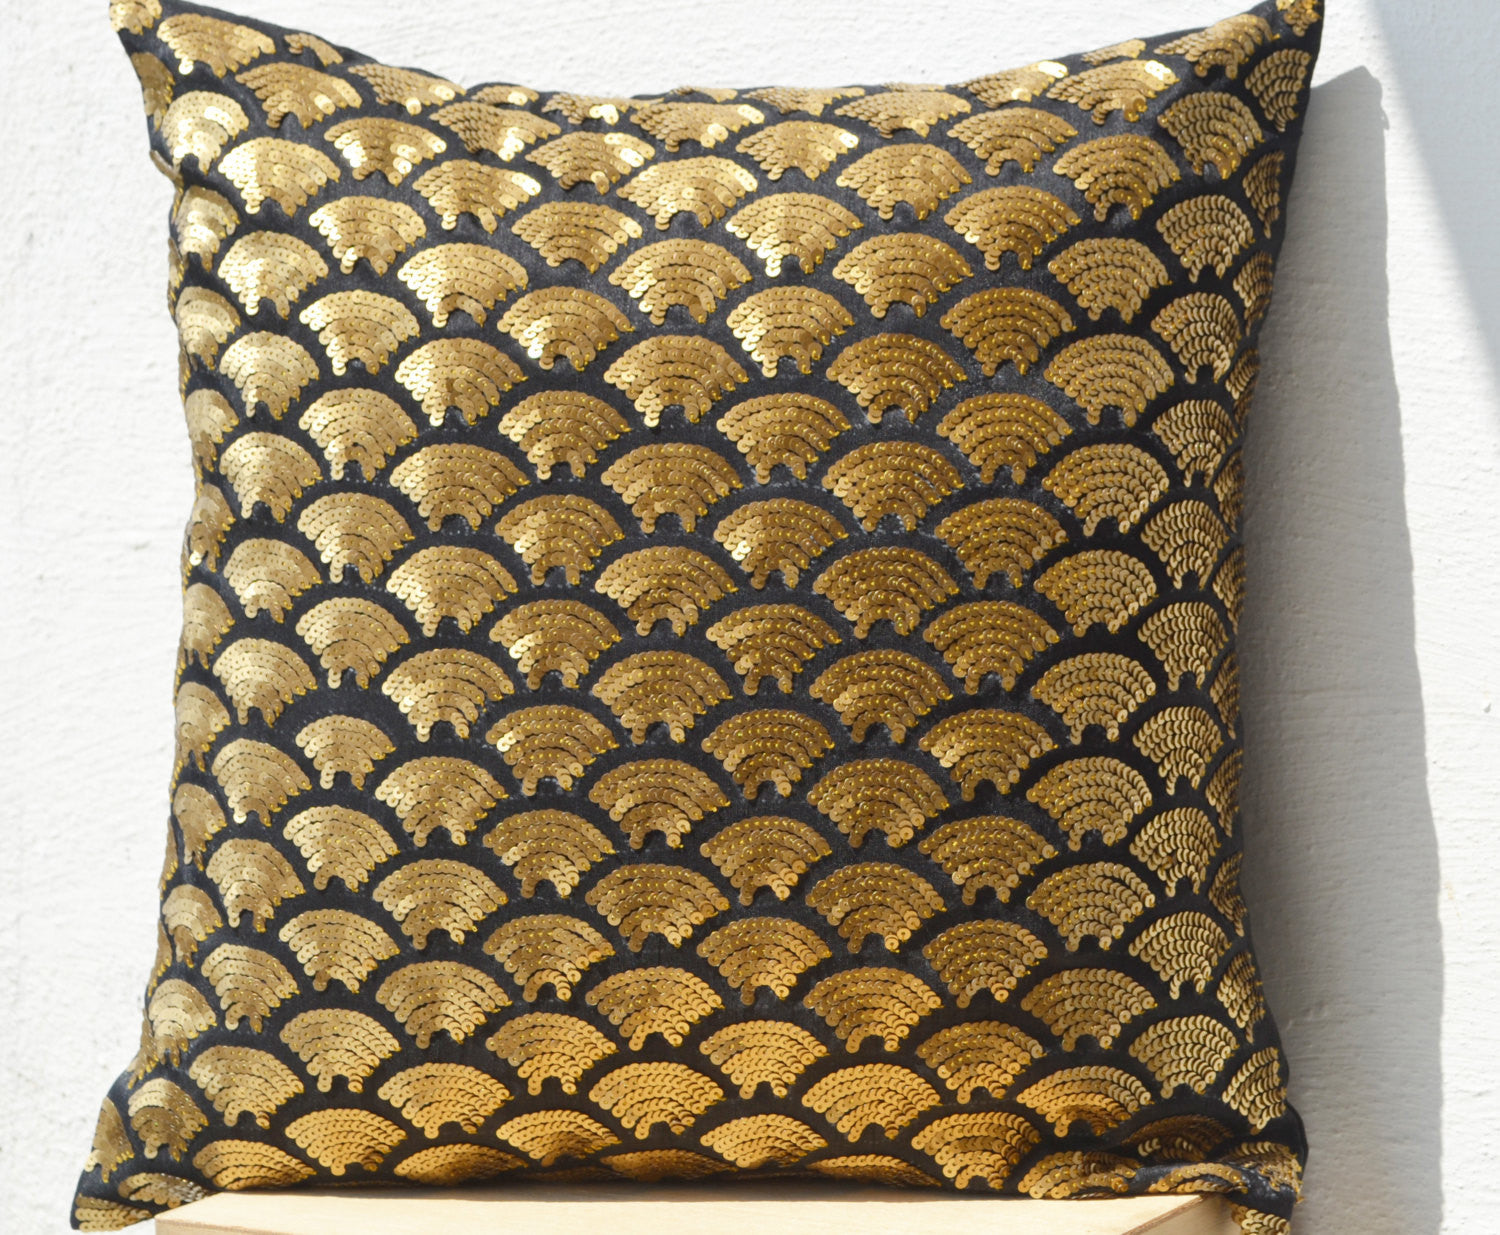 Handmade shiny gold pillow cover with deep metallic sequin